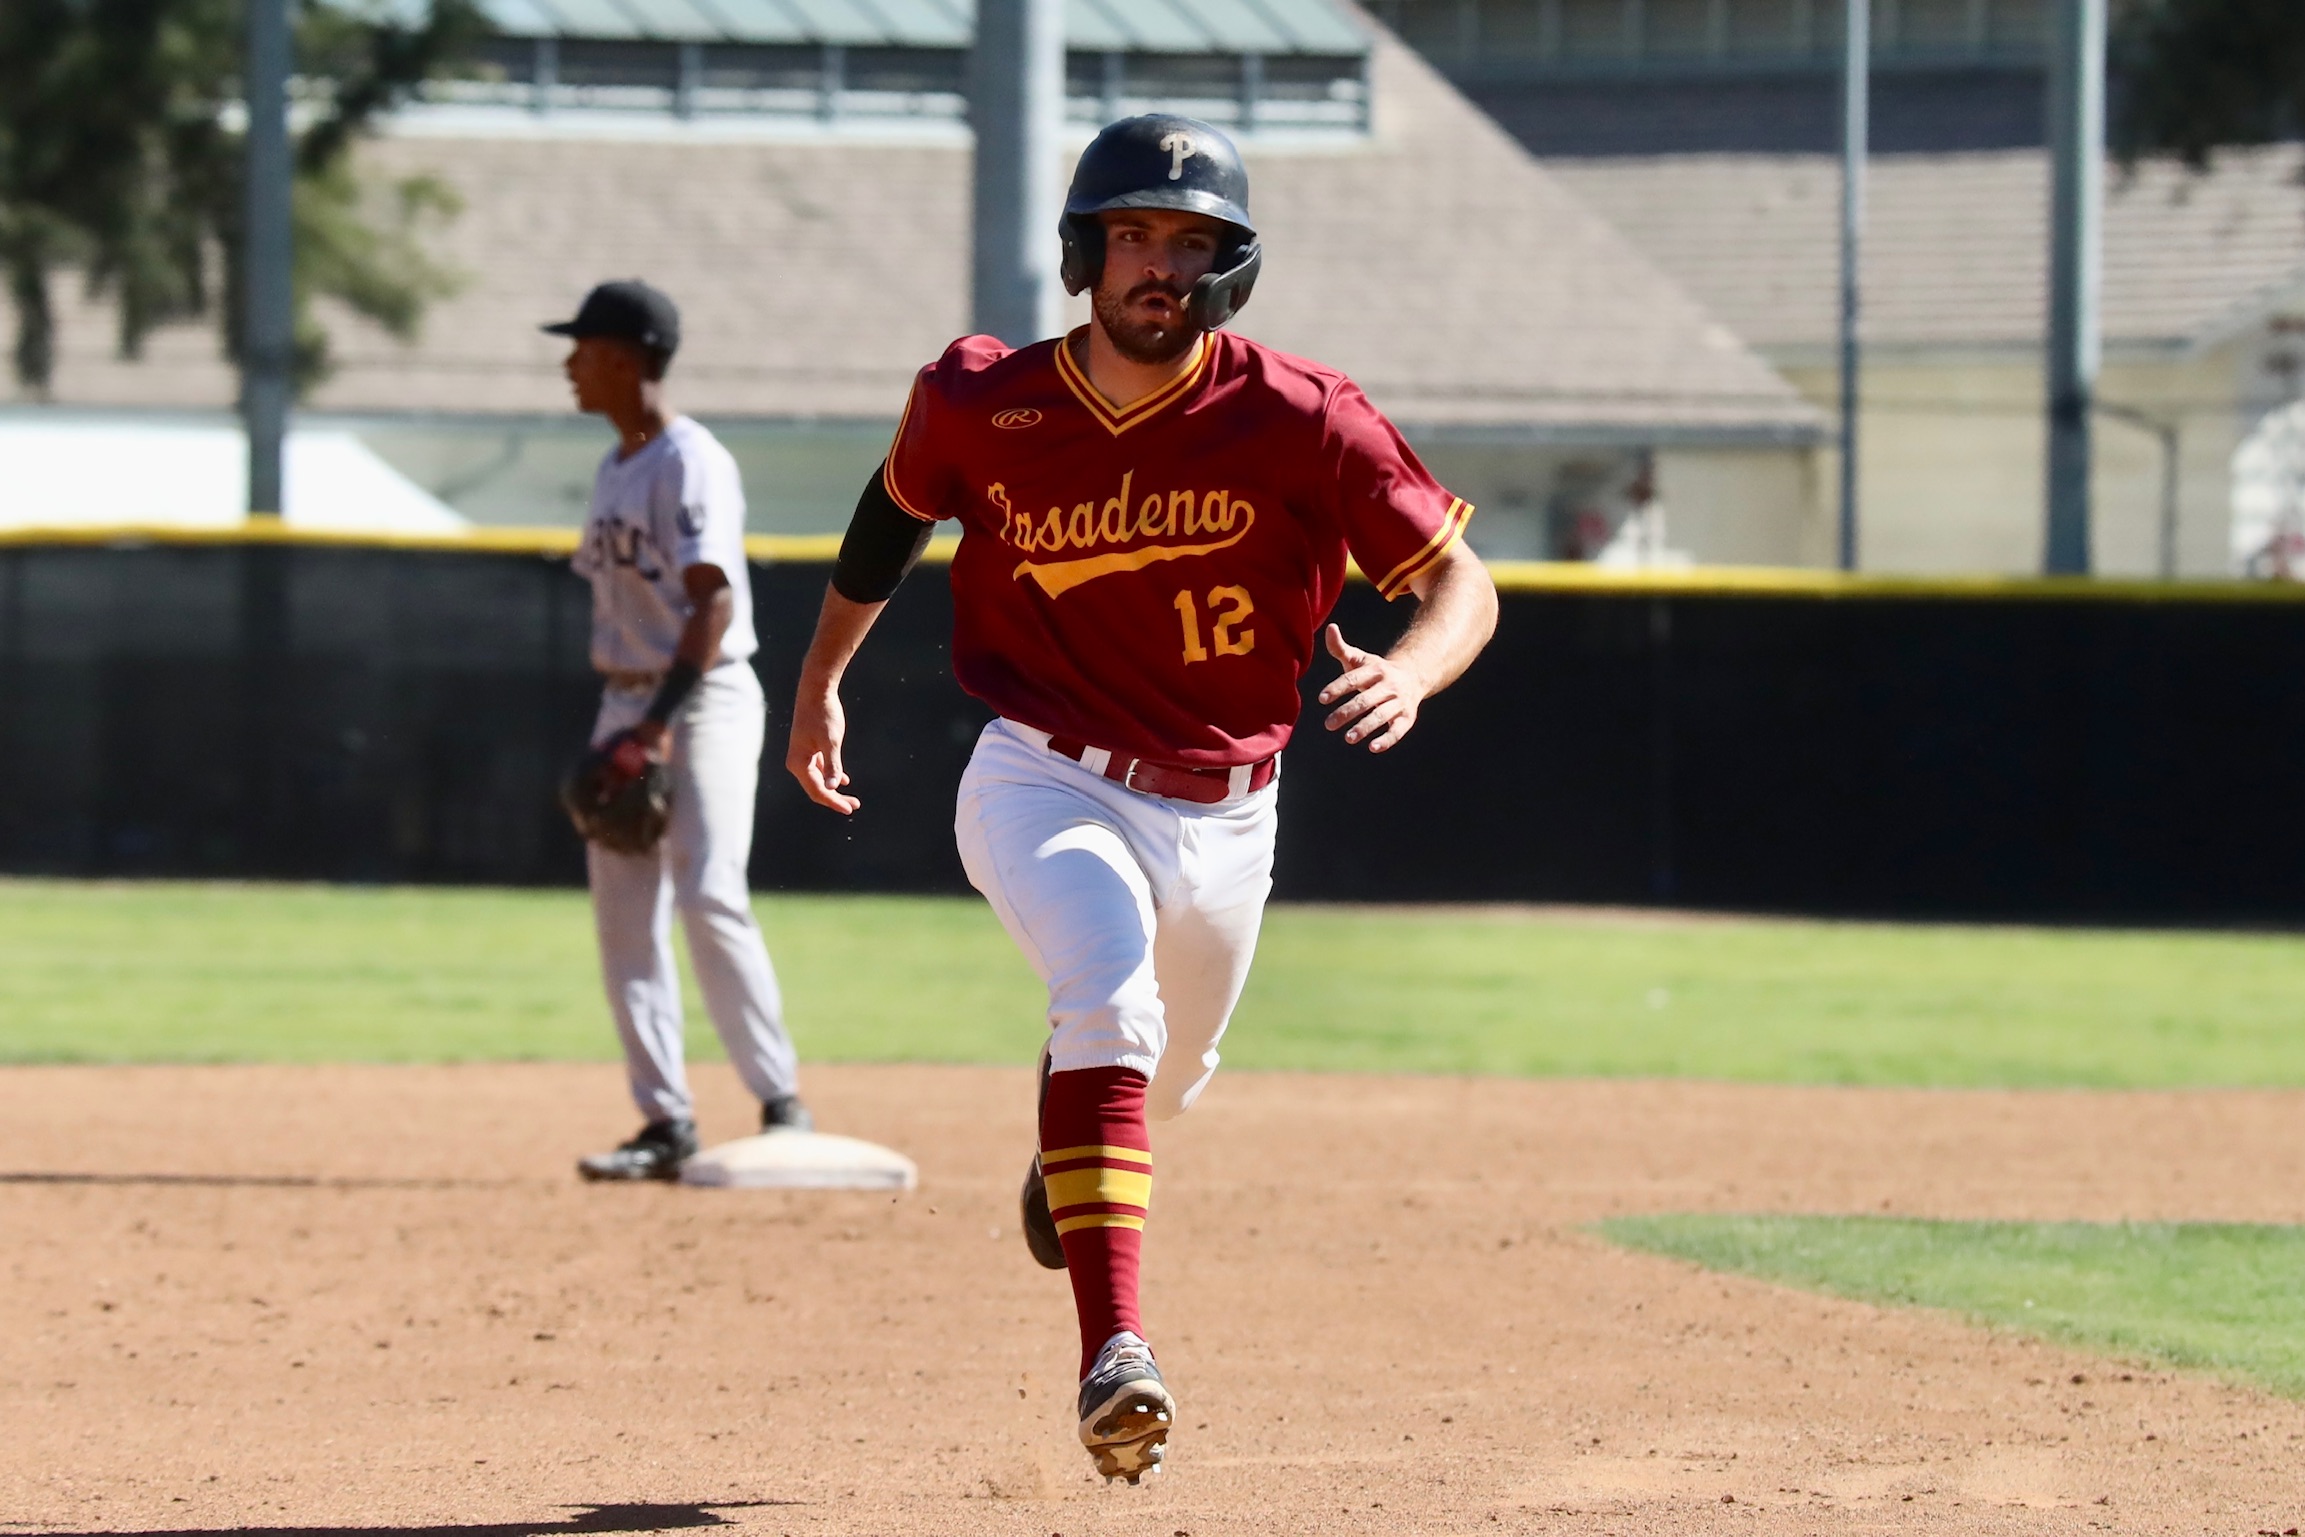 Matt Rice, who batted 4-for-4, races to third base during PCC's win over Long Beach (photo by Michael Watkins, Athletics).